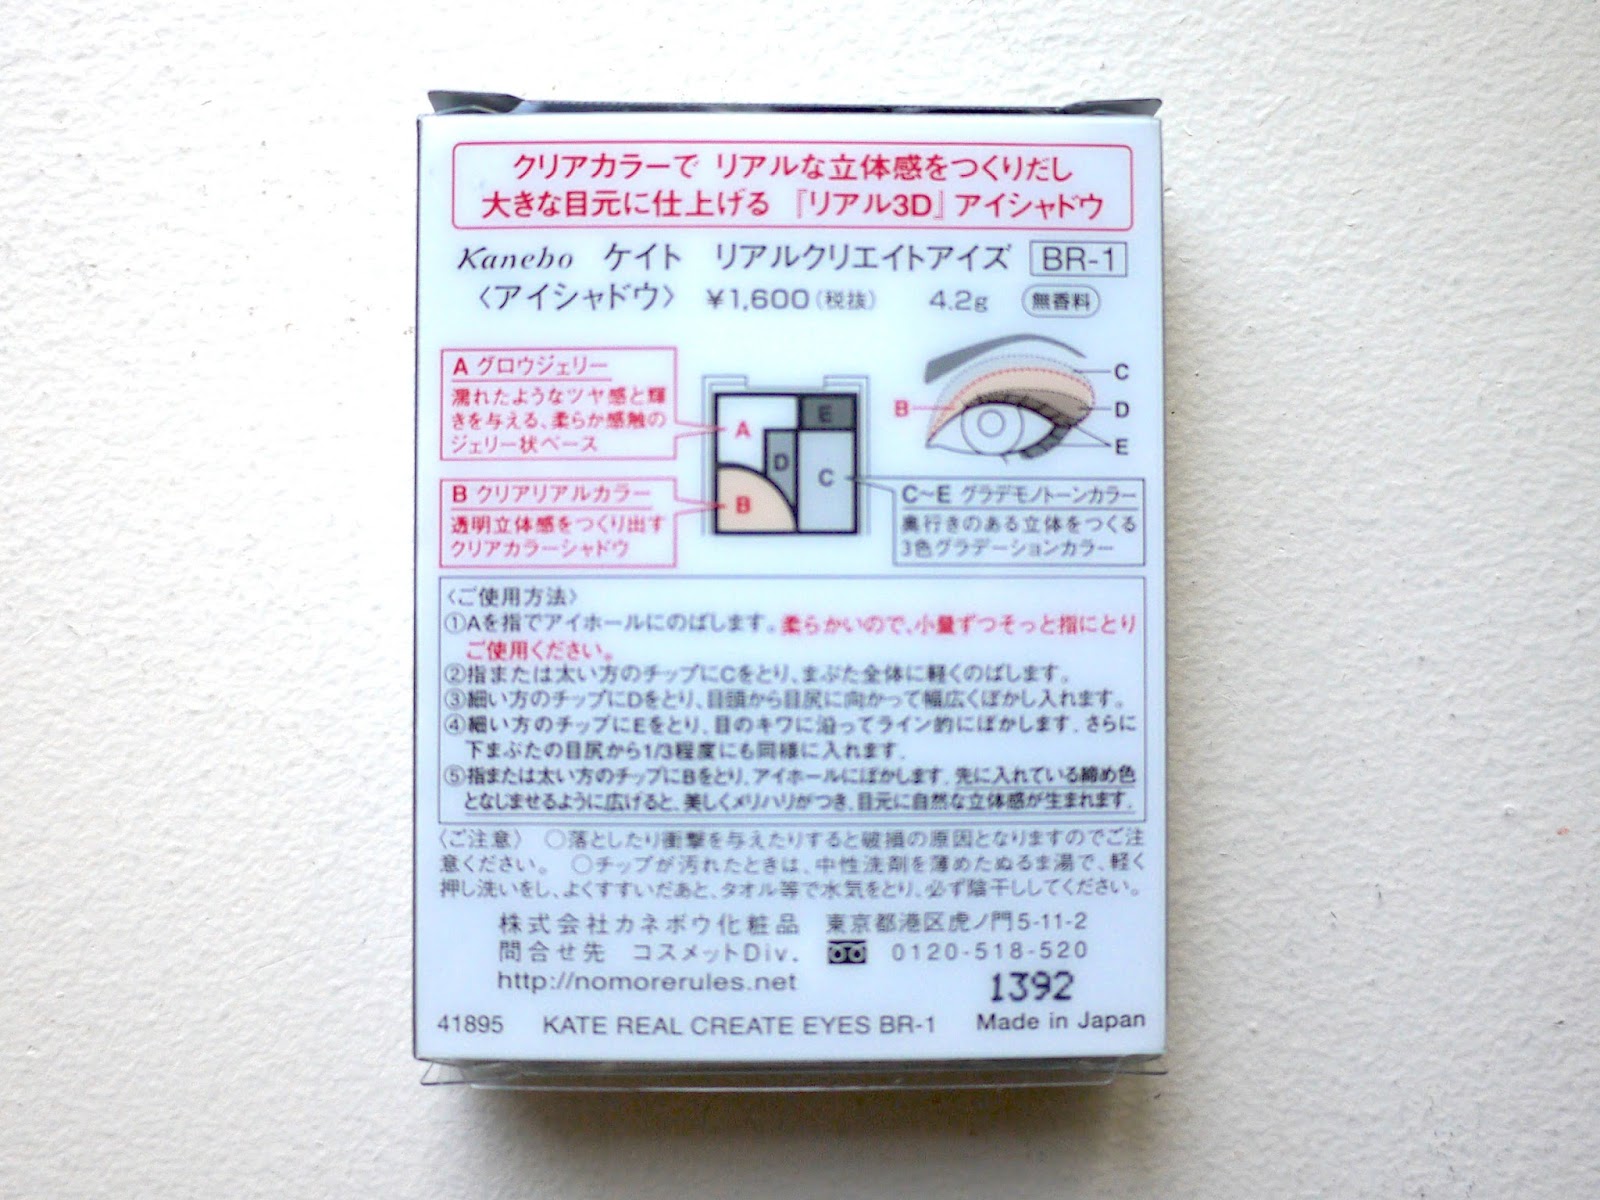 Kanebo Kate real create eyes br1 br-1 review swatch